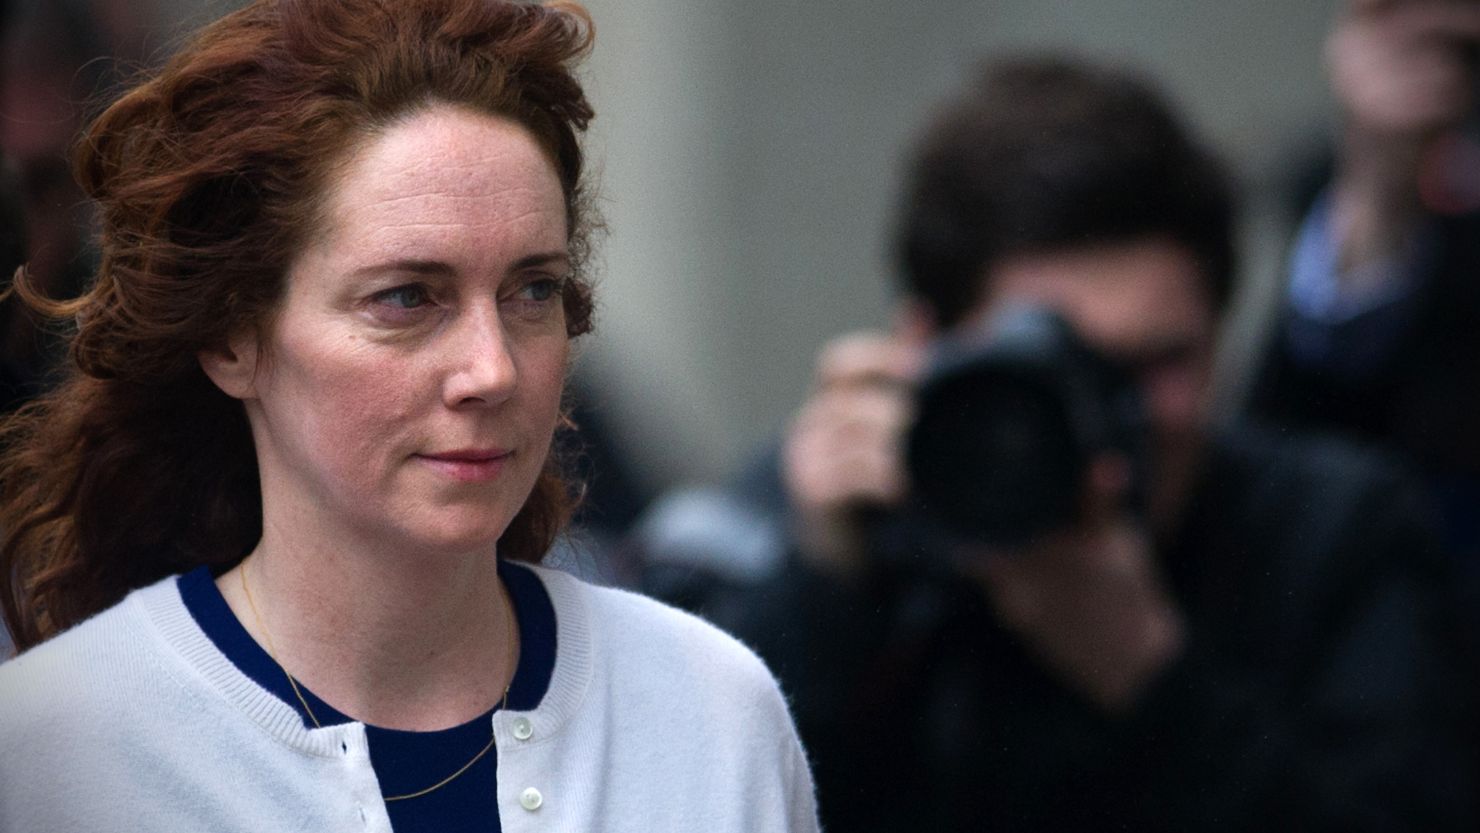 Former News of the World chief executive Rebekah Brooks arrives at court in London on February 20, 2014.